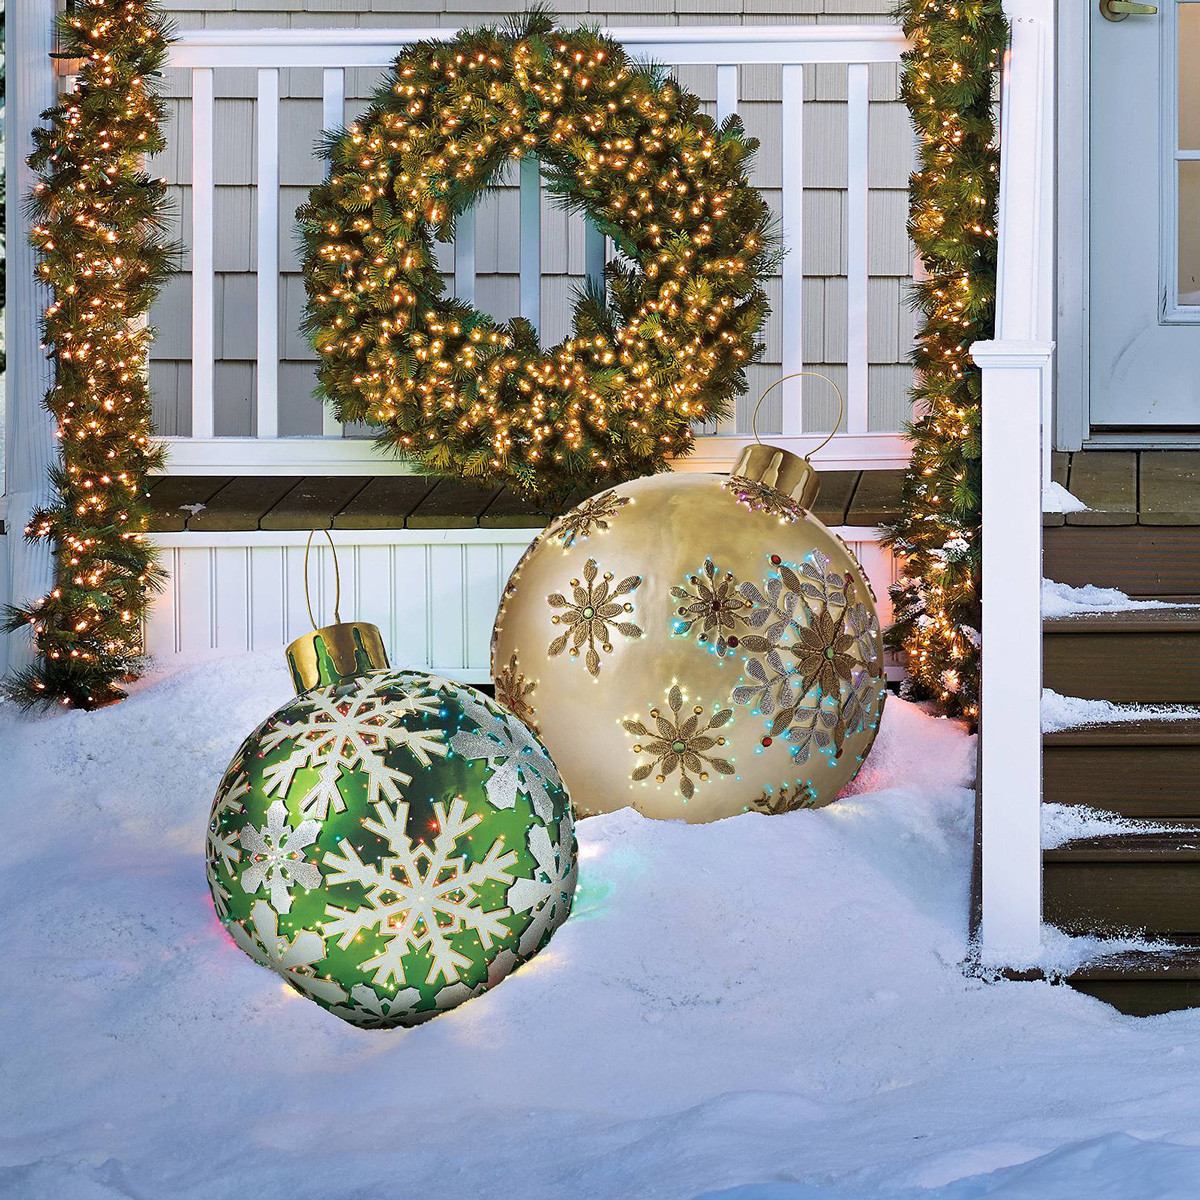 Oversized Outdoor Christmas Ornaments
 Massive Fiber Optic LED Outdoor Christmas Ornaments The